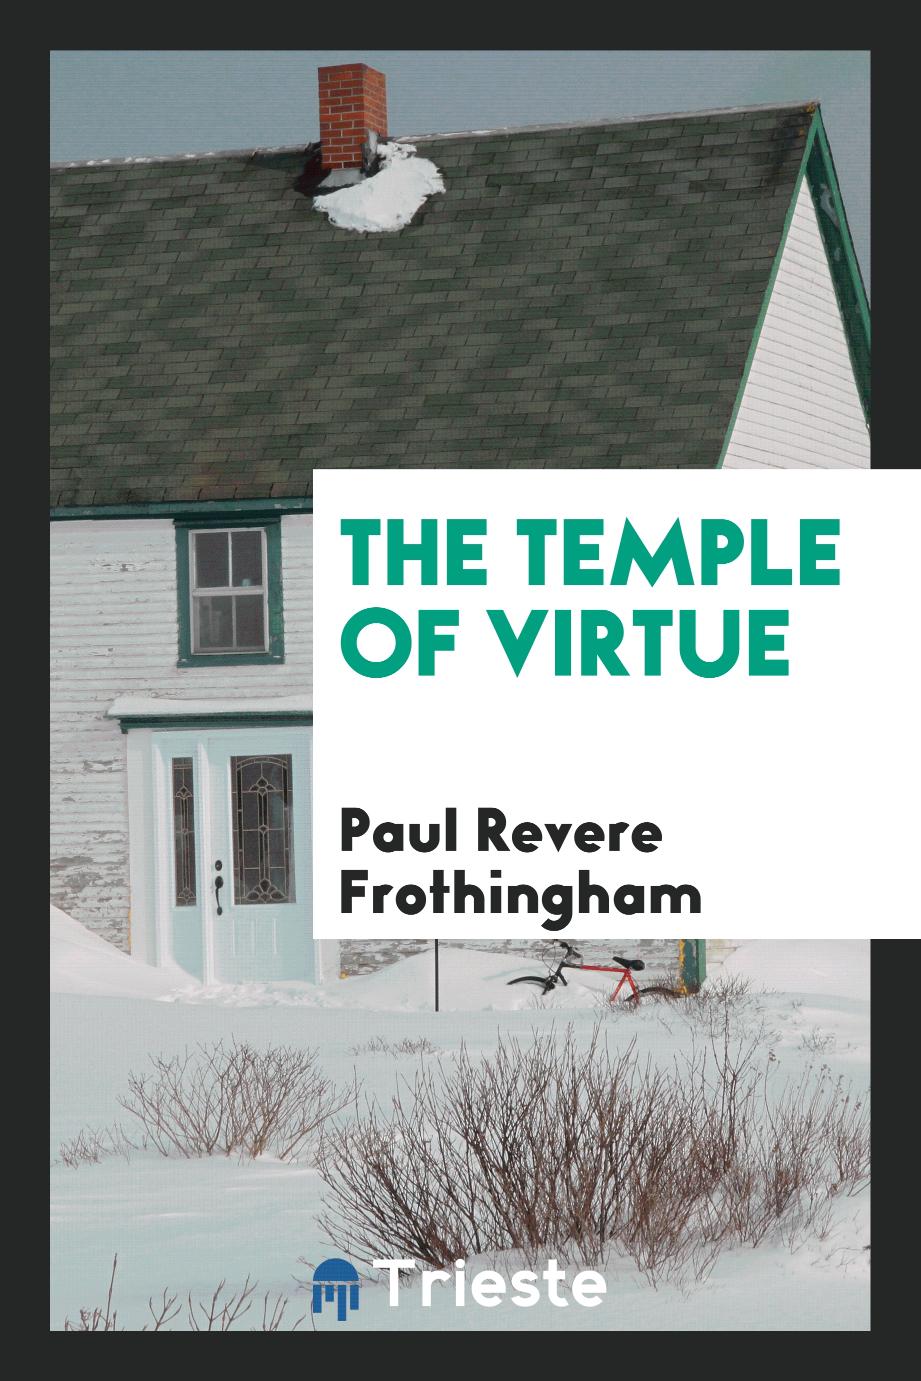 The temple of virtue